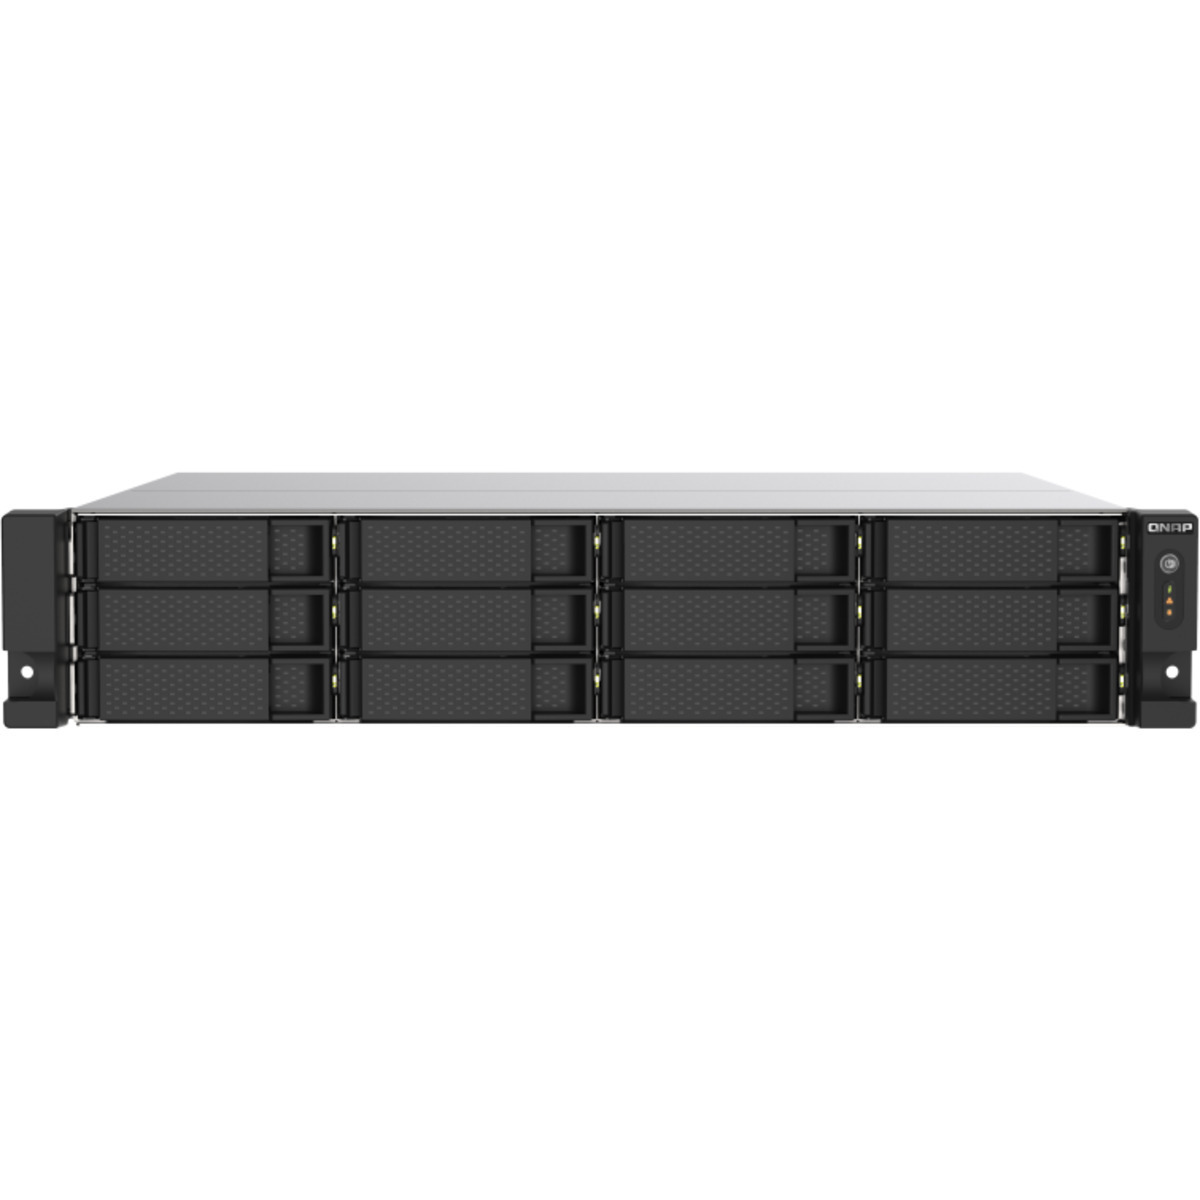 QNAP TS-1273AU-RP 180tb 12-Bay RackMount Multimedia / Power User / Business NAS - Network Attached Storage Device 9x20tb Western Digital Gold WD202KRYZ 3.5 7200rpm SATA 6Gb/s HDD ENTERPRISE Class Drives Installed - Burn-In Tested - FREE RAM UPGRADE TS-1273AU-RP